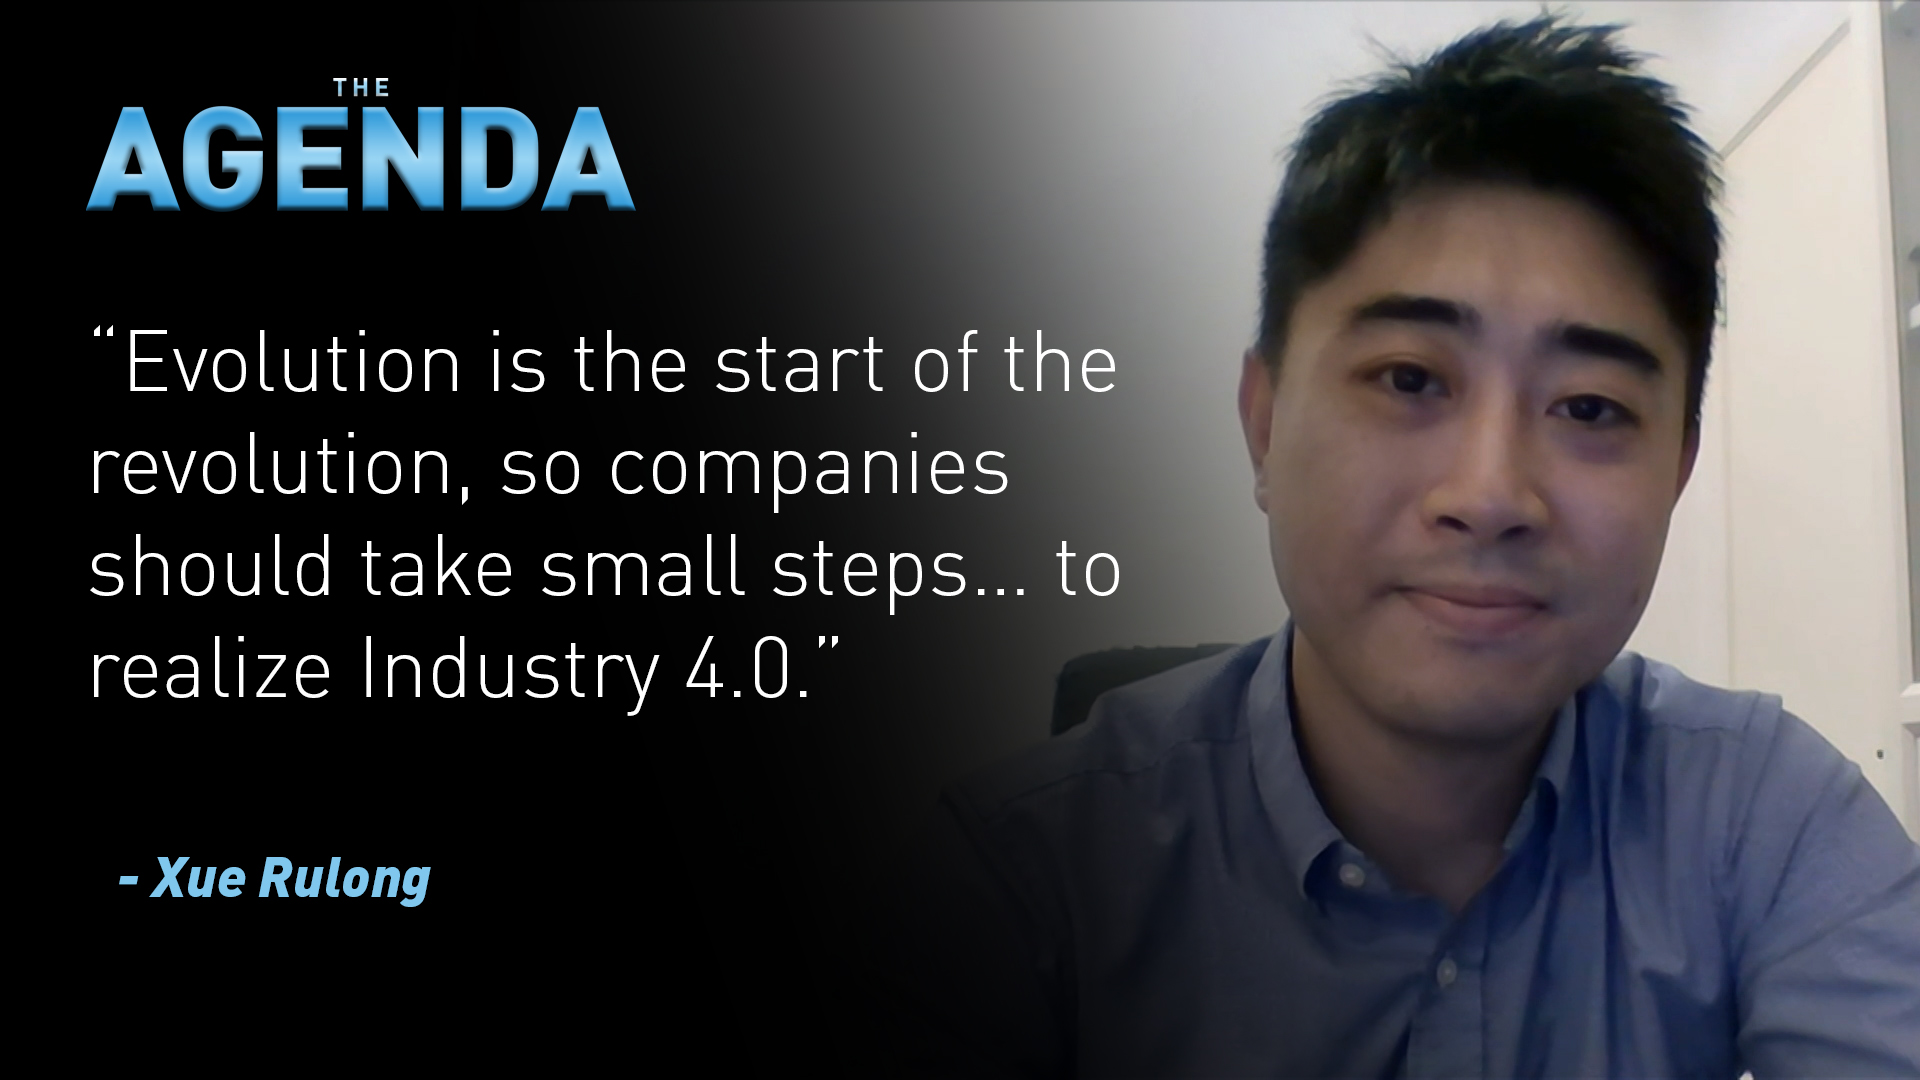 The Future of Supply Chains - The Agenda full episode